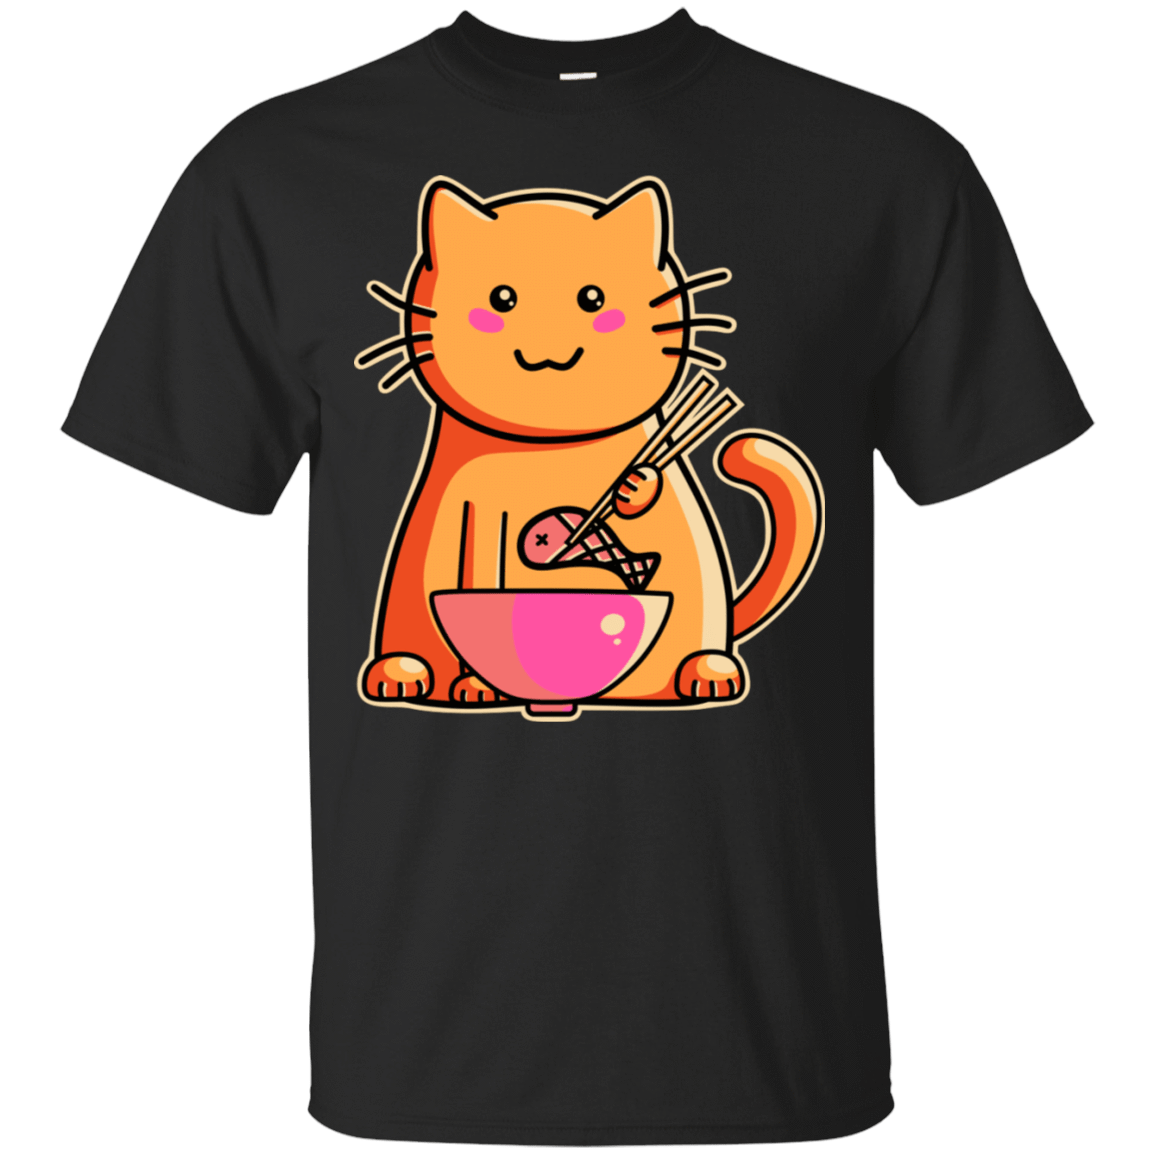 T-Shirts Black / S Cats Favourite Meal T-Shirt